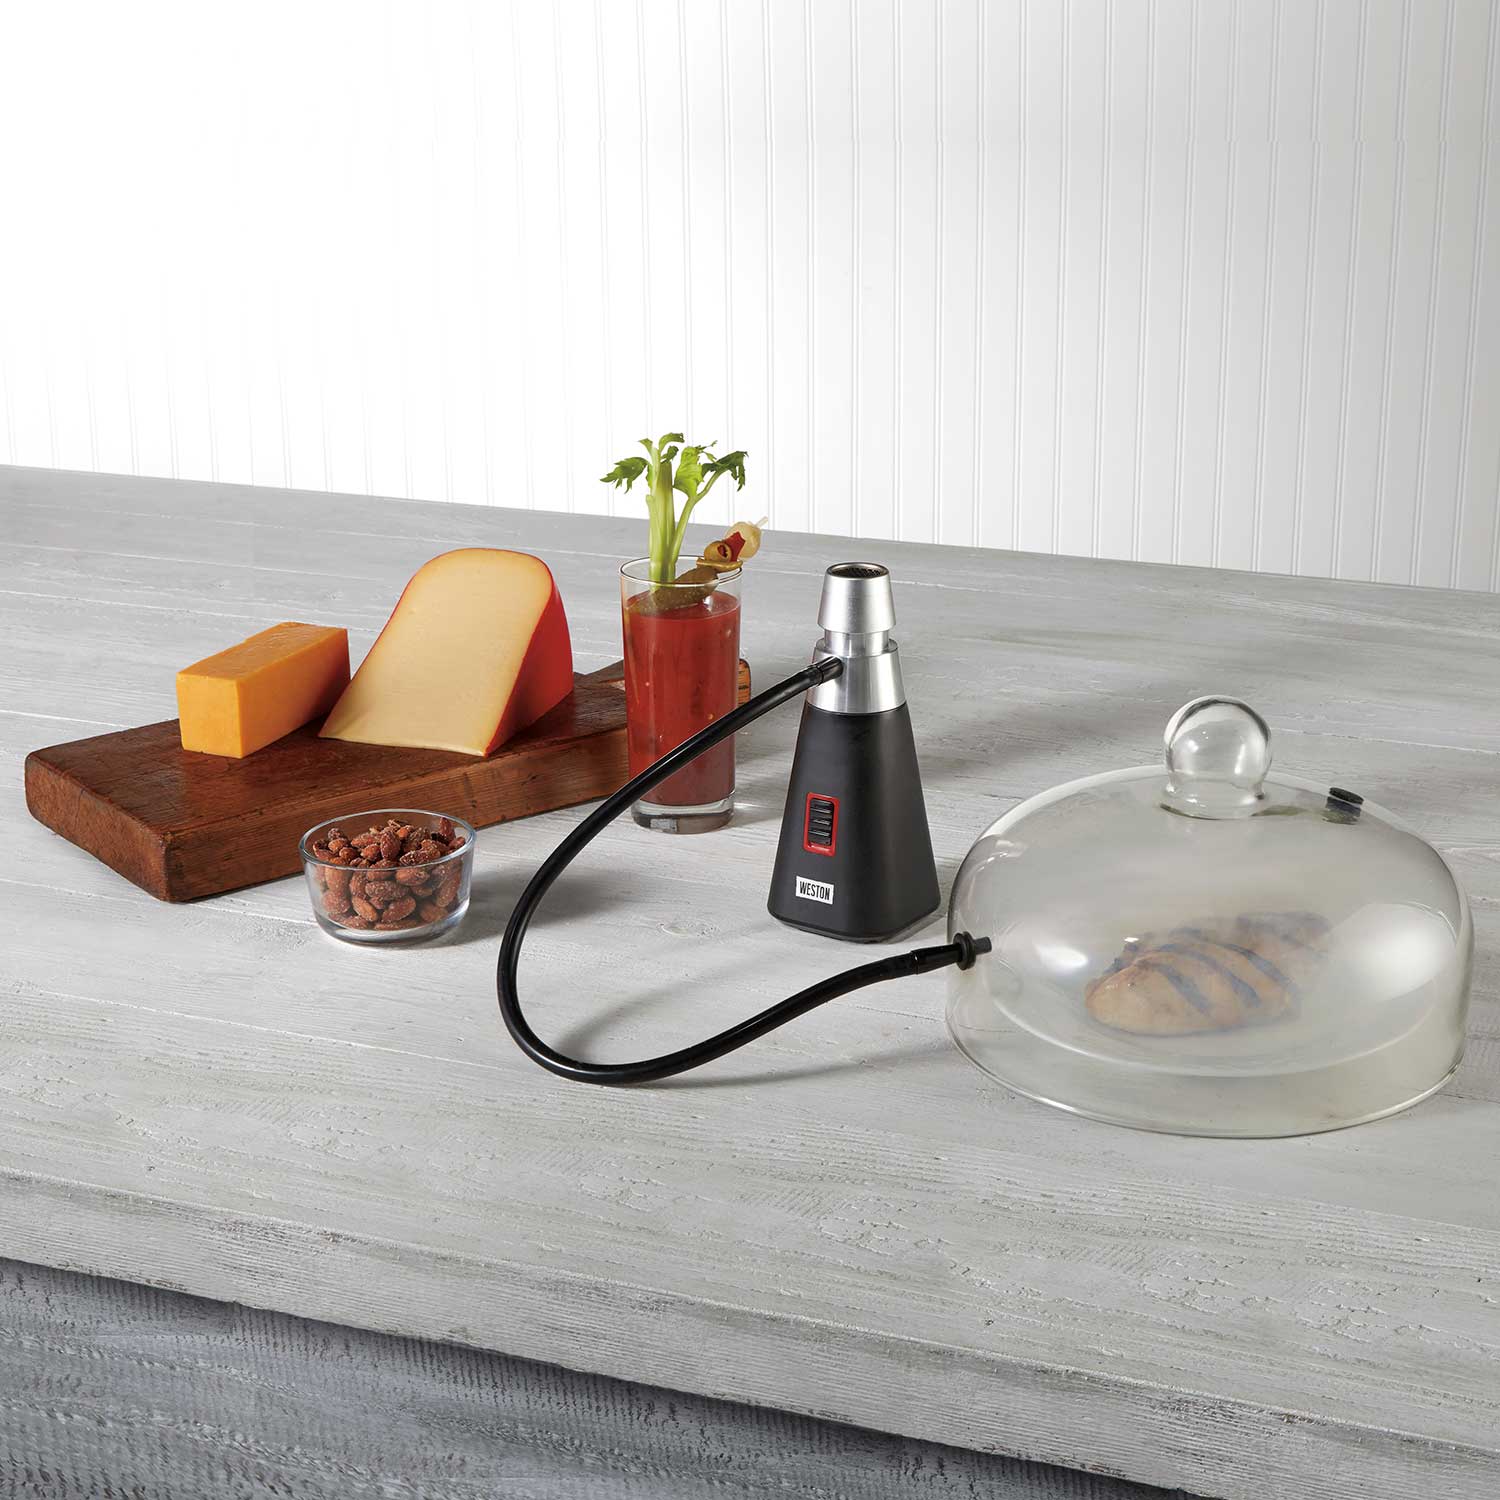 The Best Portable Smoke Infusers